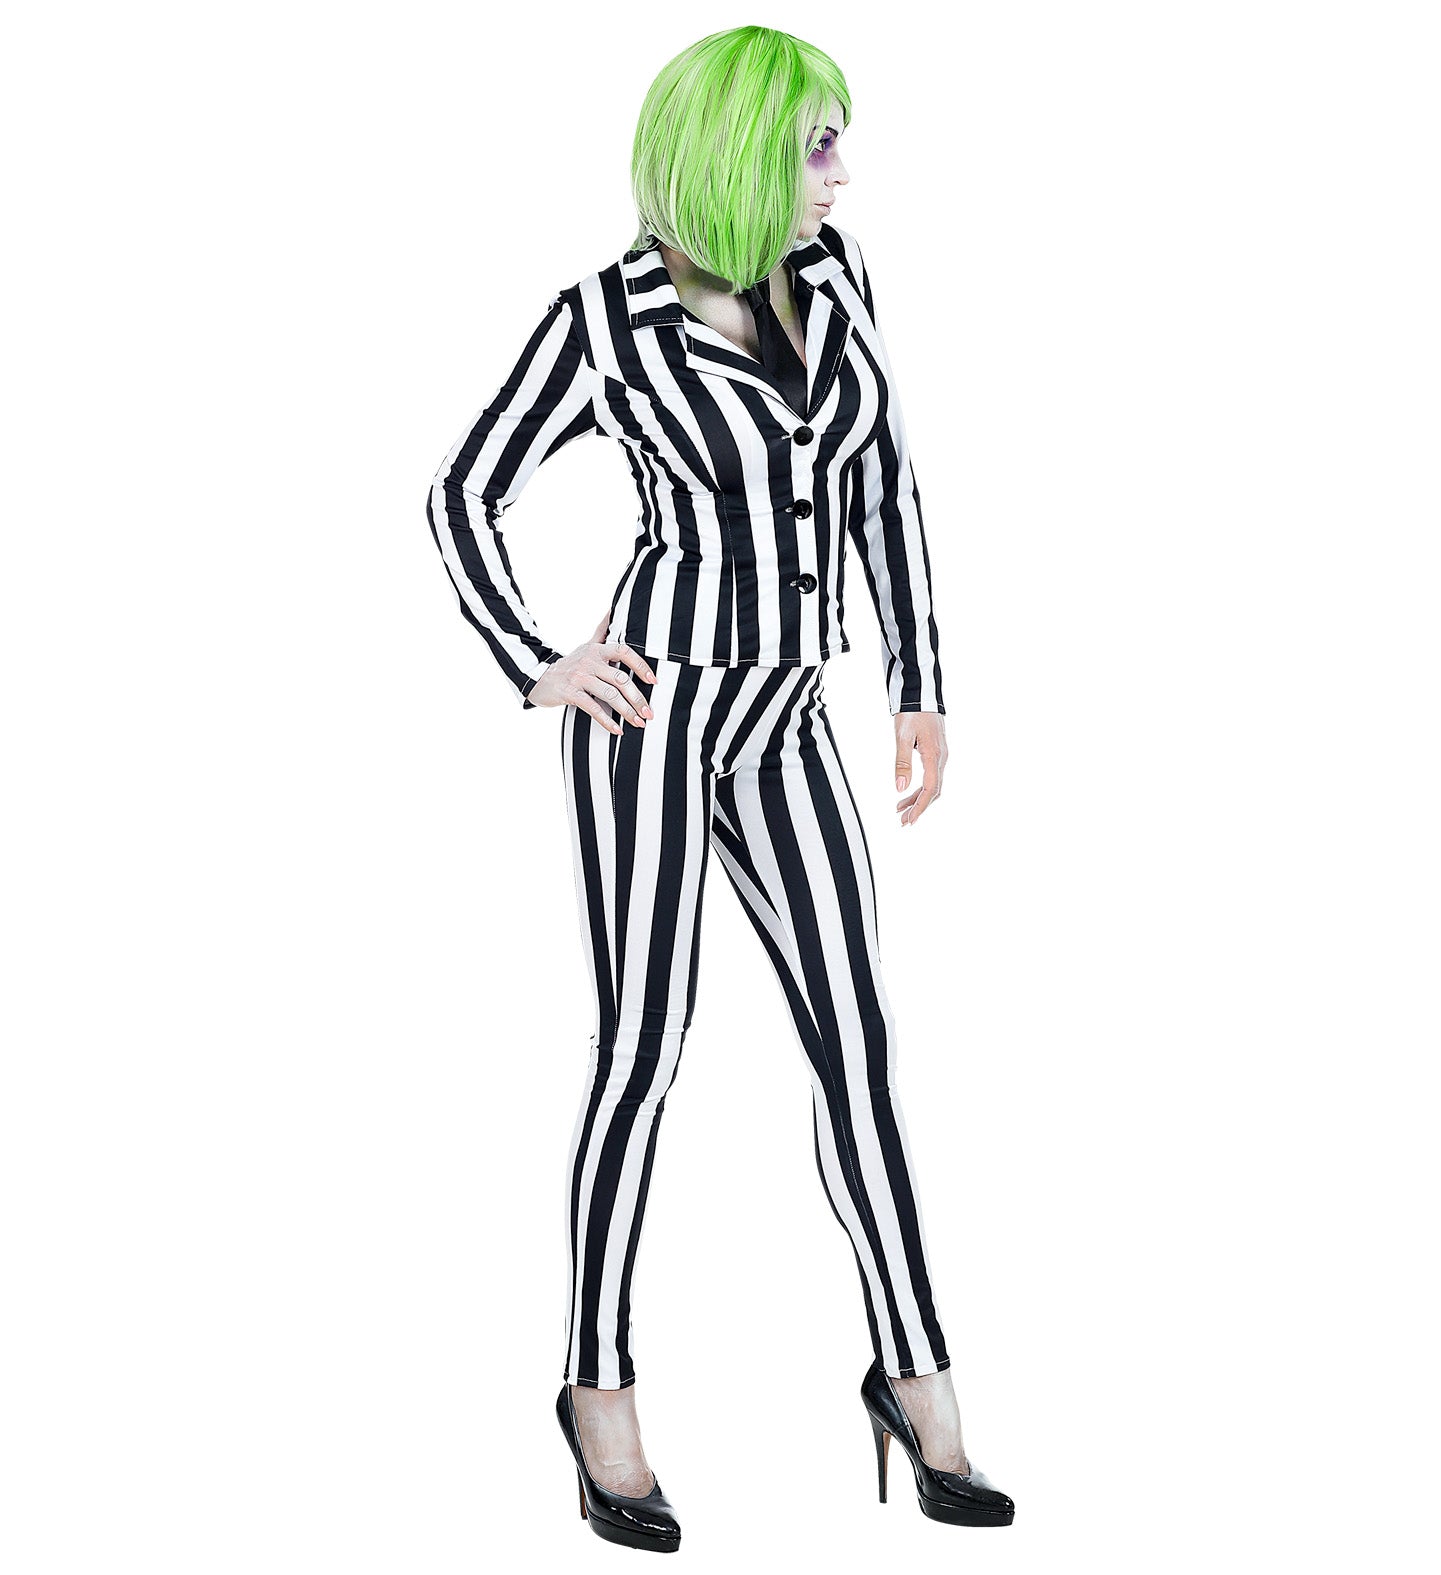 Sleazy Ghost Beetlejuice women's outfit